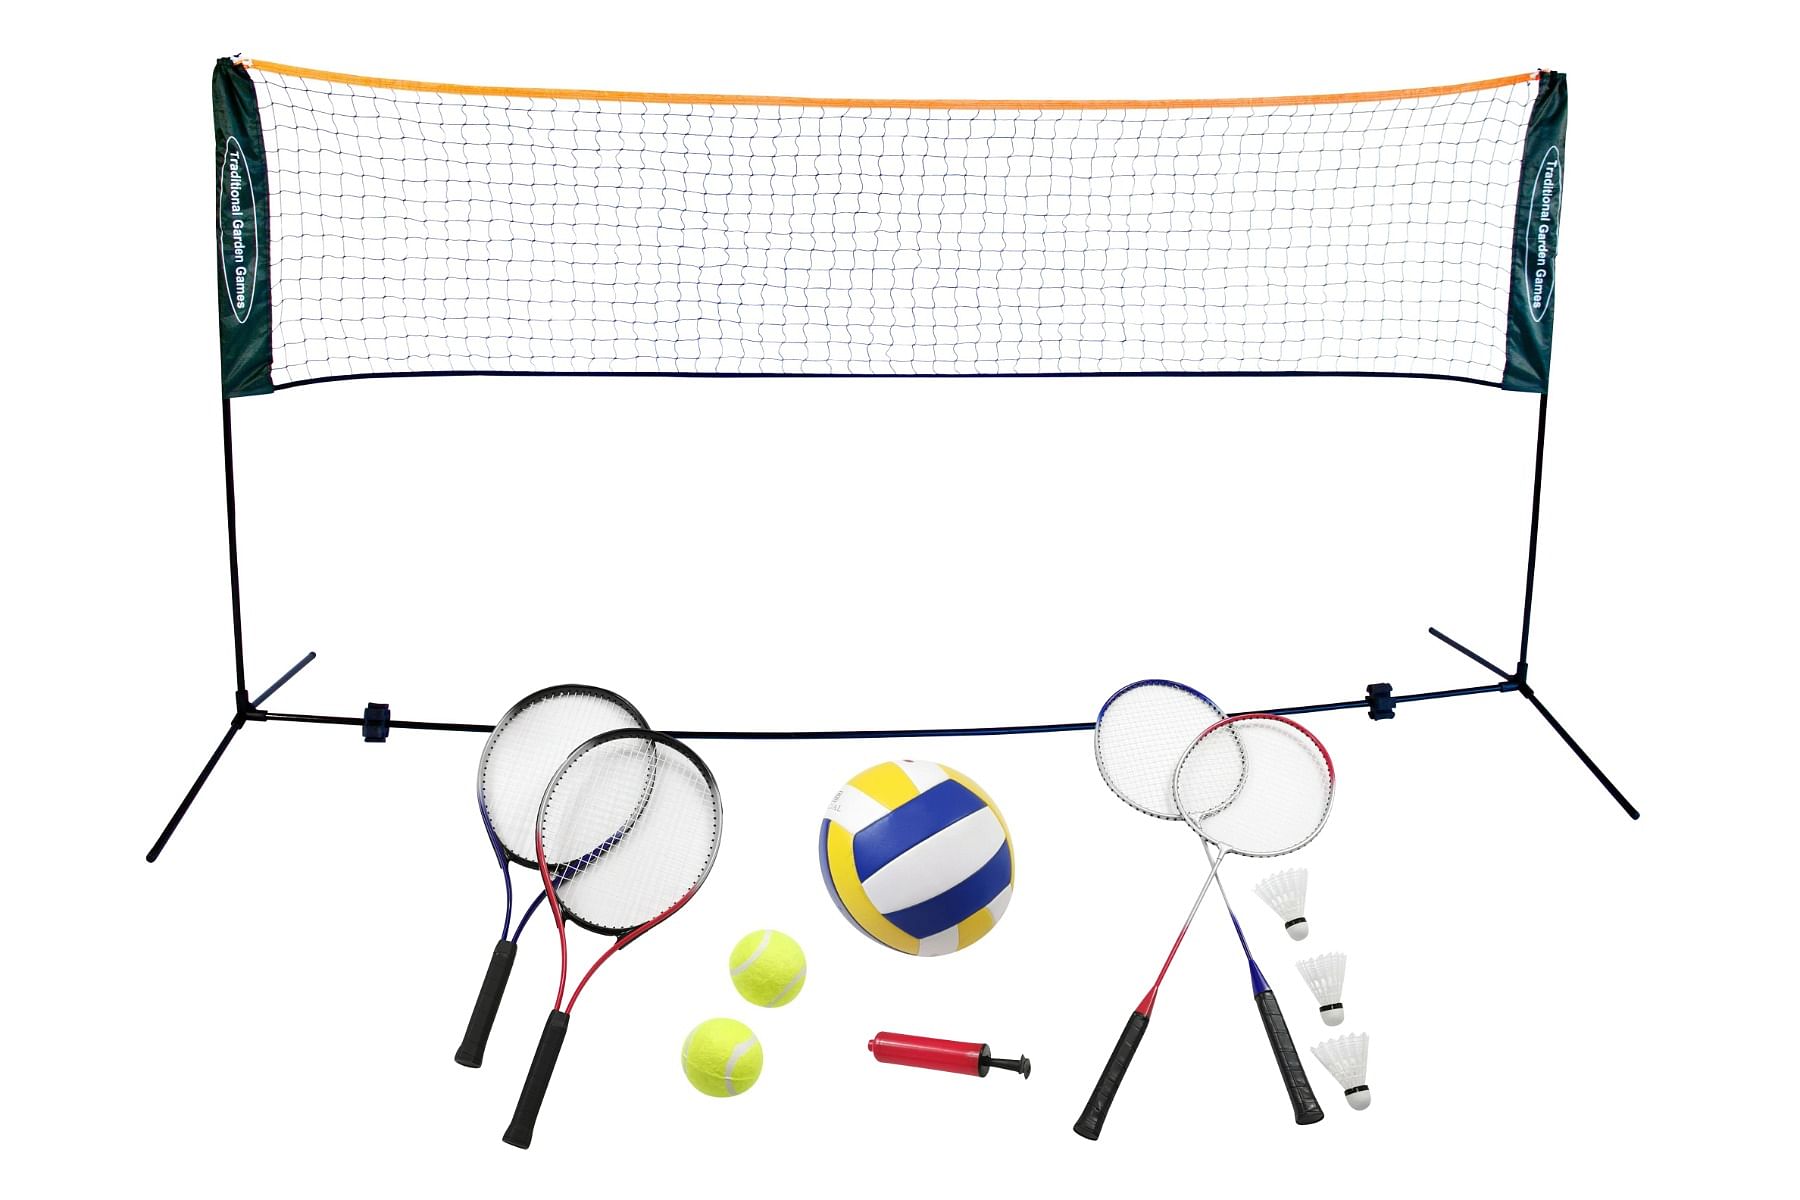 3-5M Portable Badminton Volleyball Tennis Net Set With Stand/Frame Carry Bag UK 